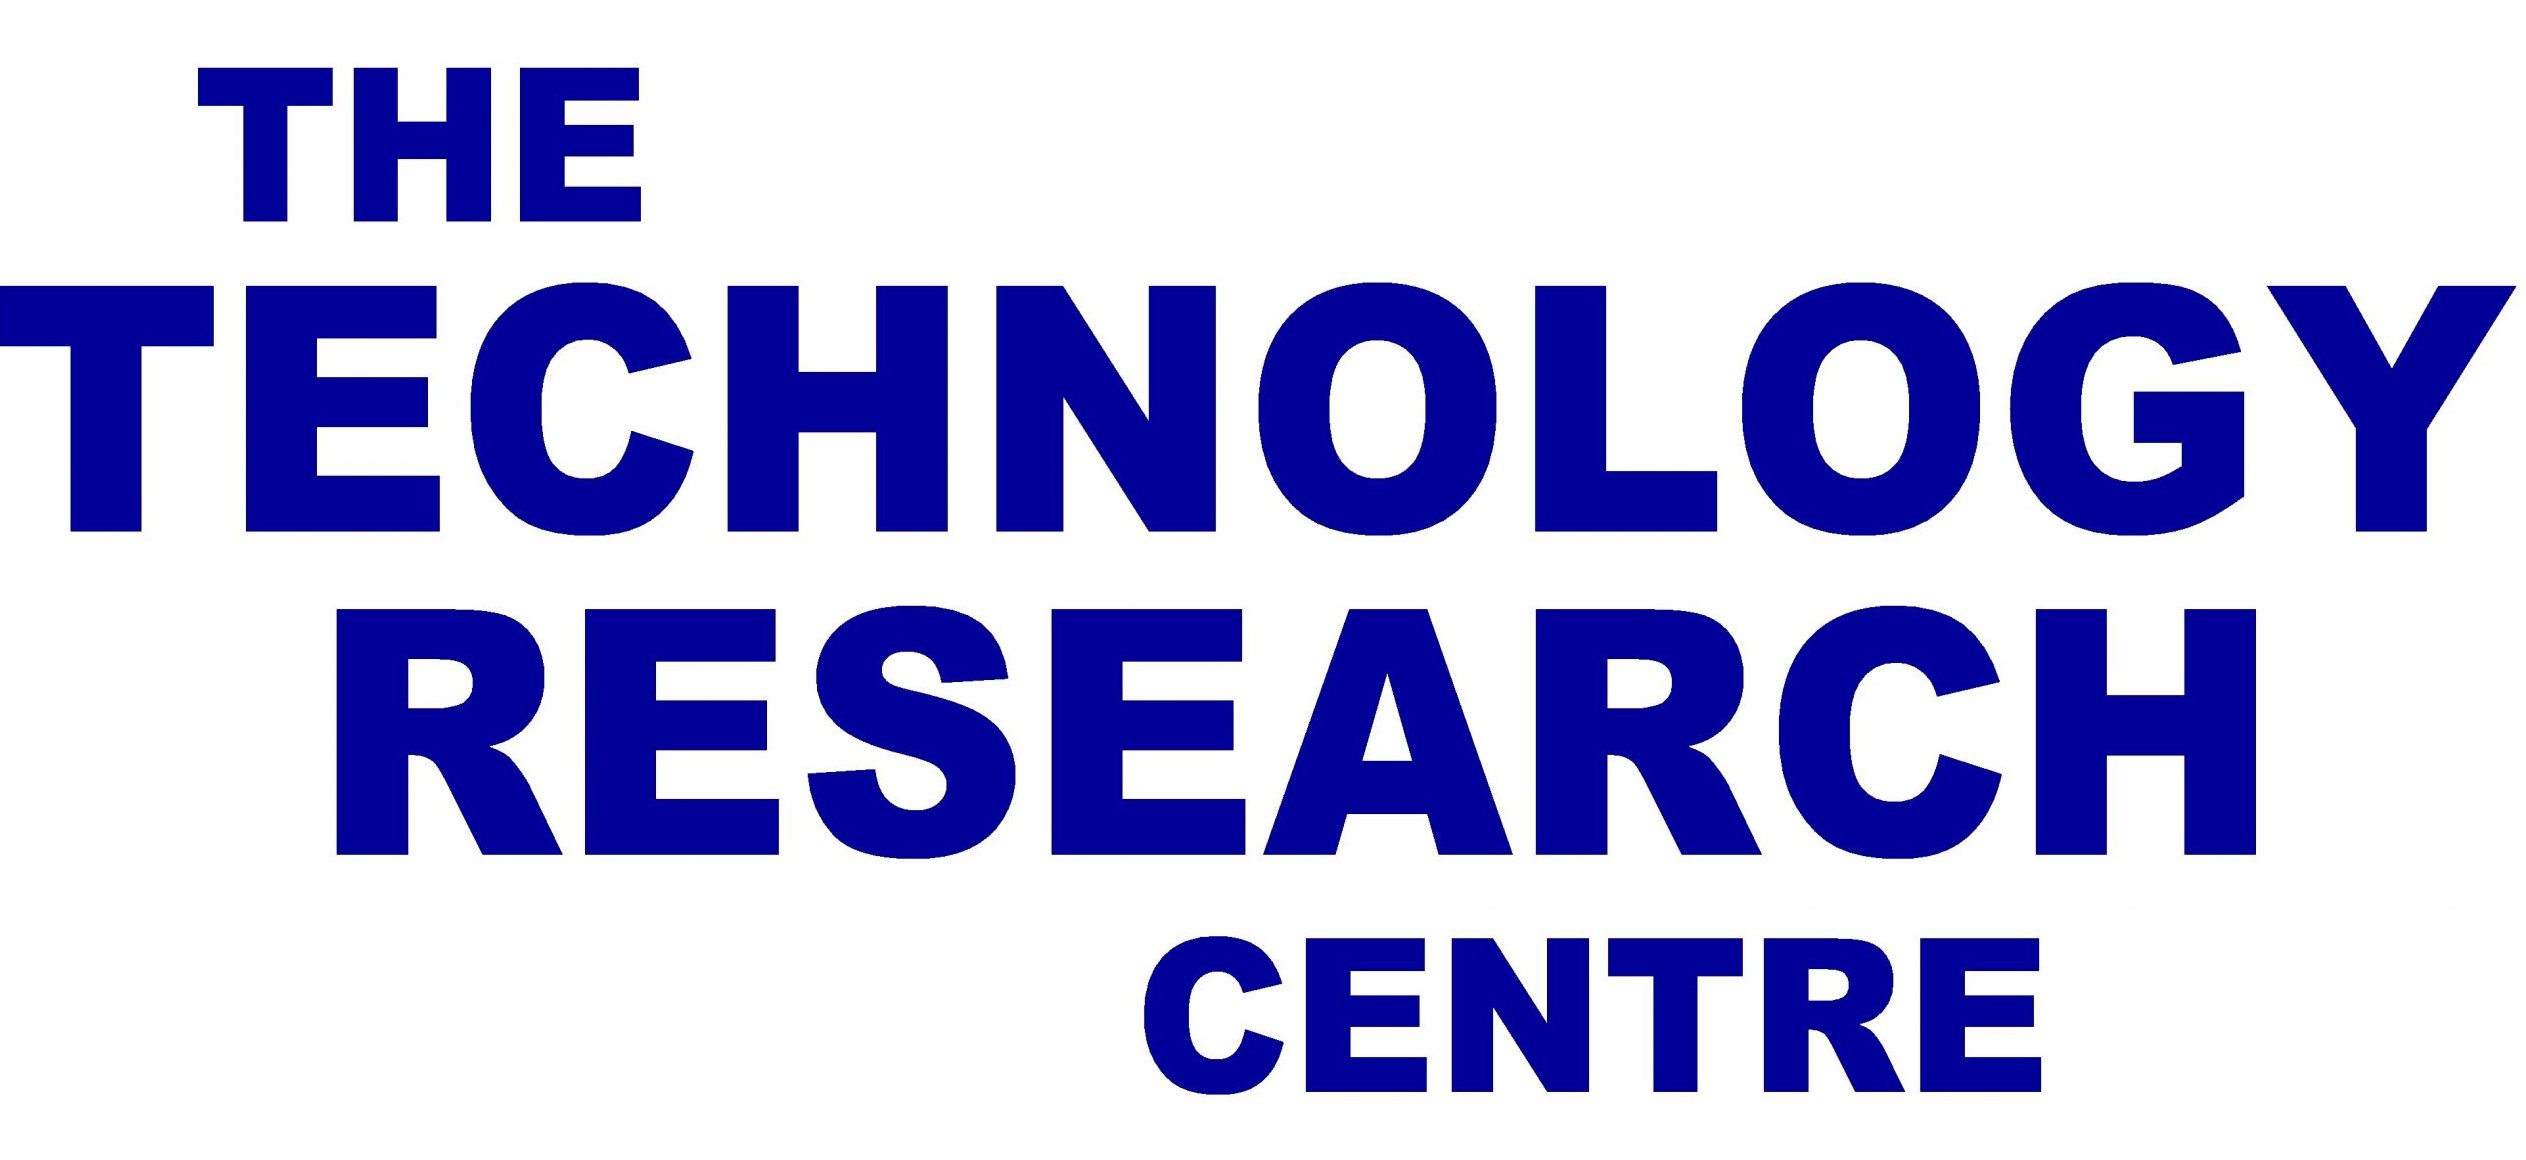 The Technology Research Centre